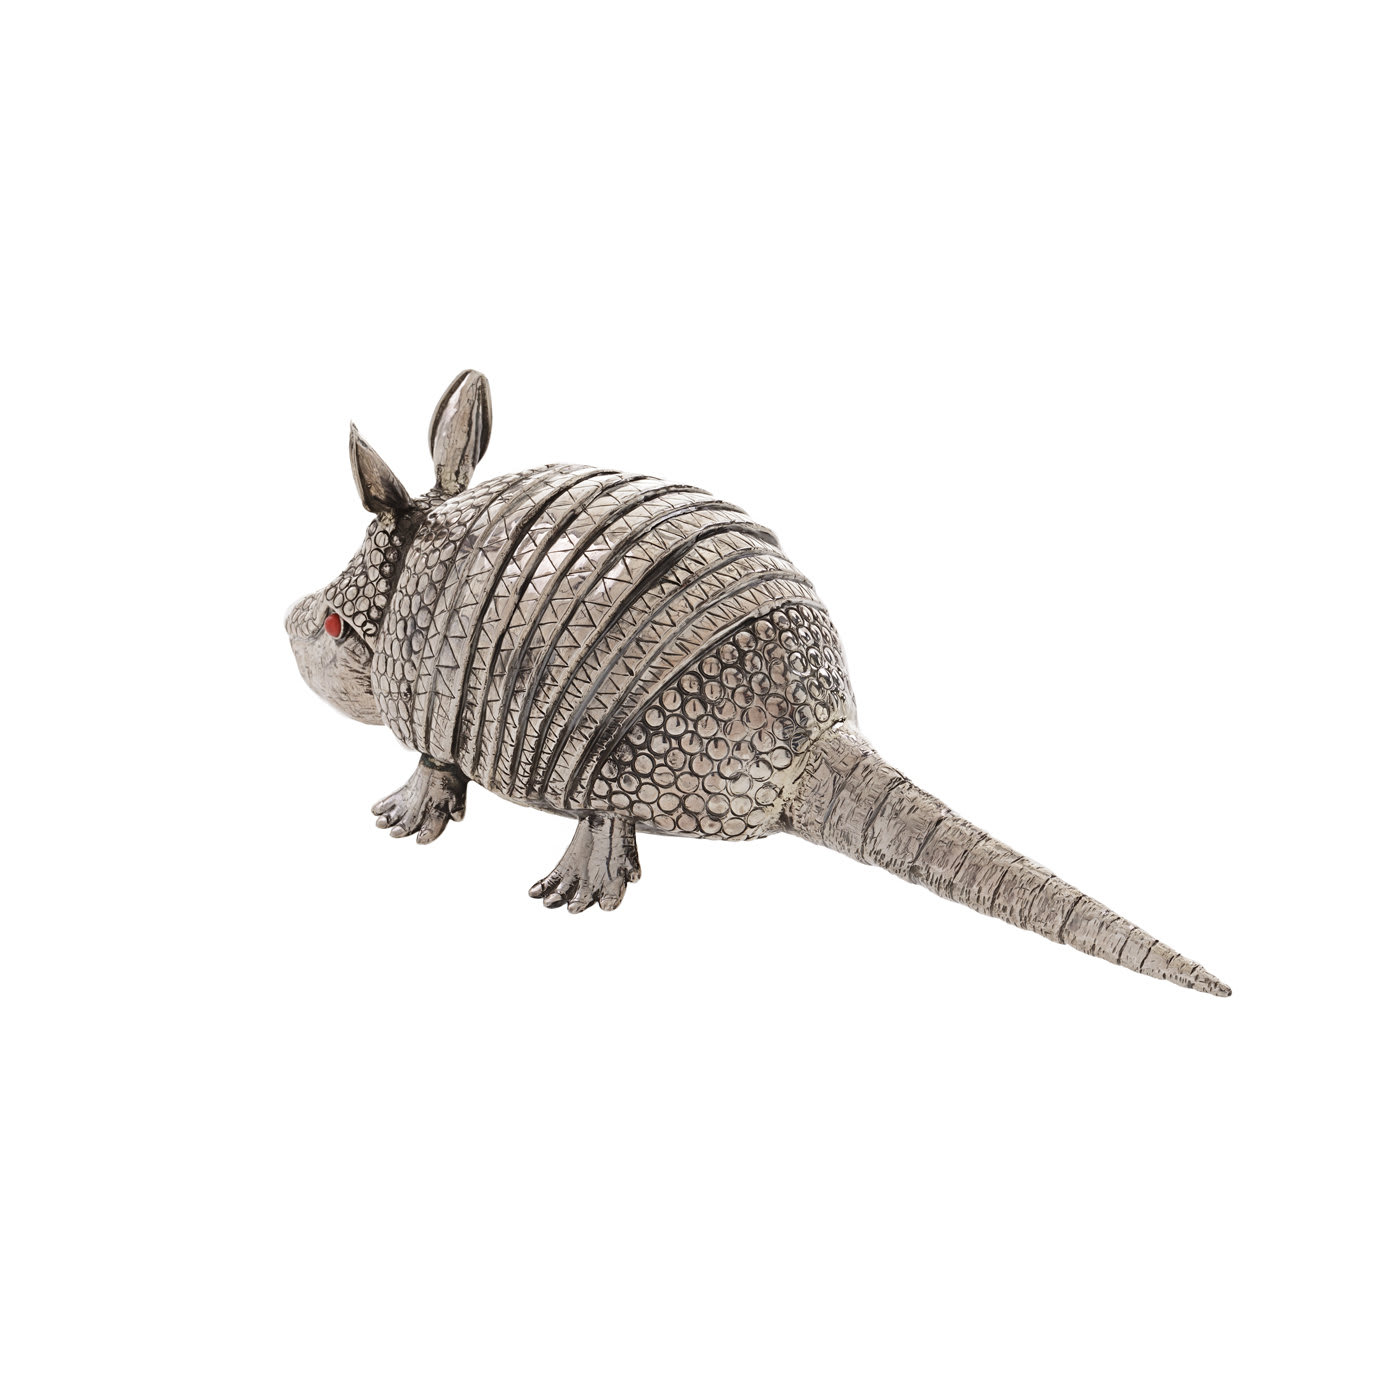 The Armadillo Sterling Silver Lighter - Fratelli Lisi